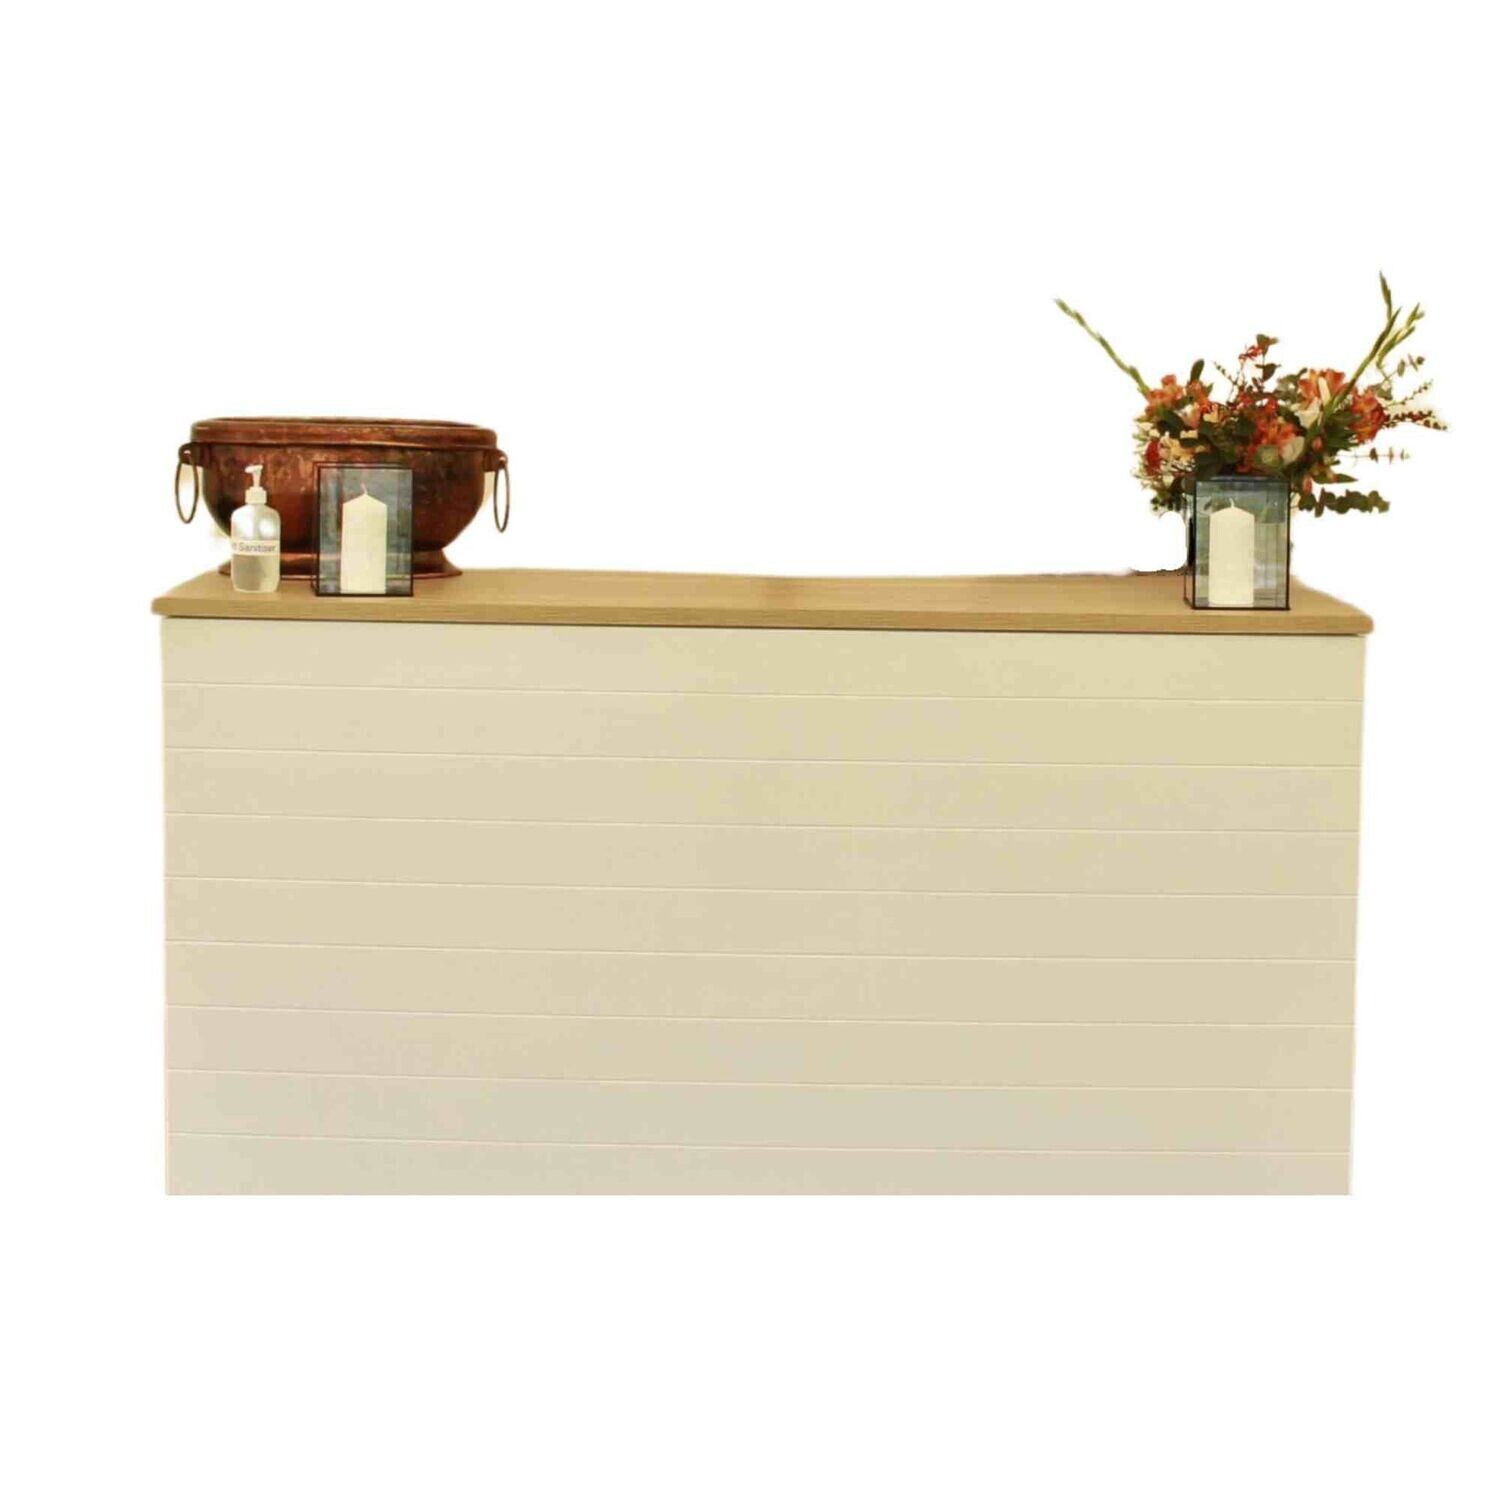 Bar station - white with wooden top (1.8m)